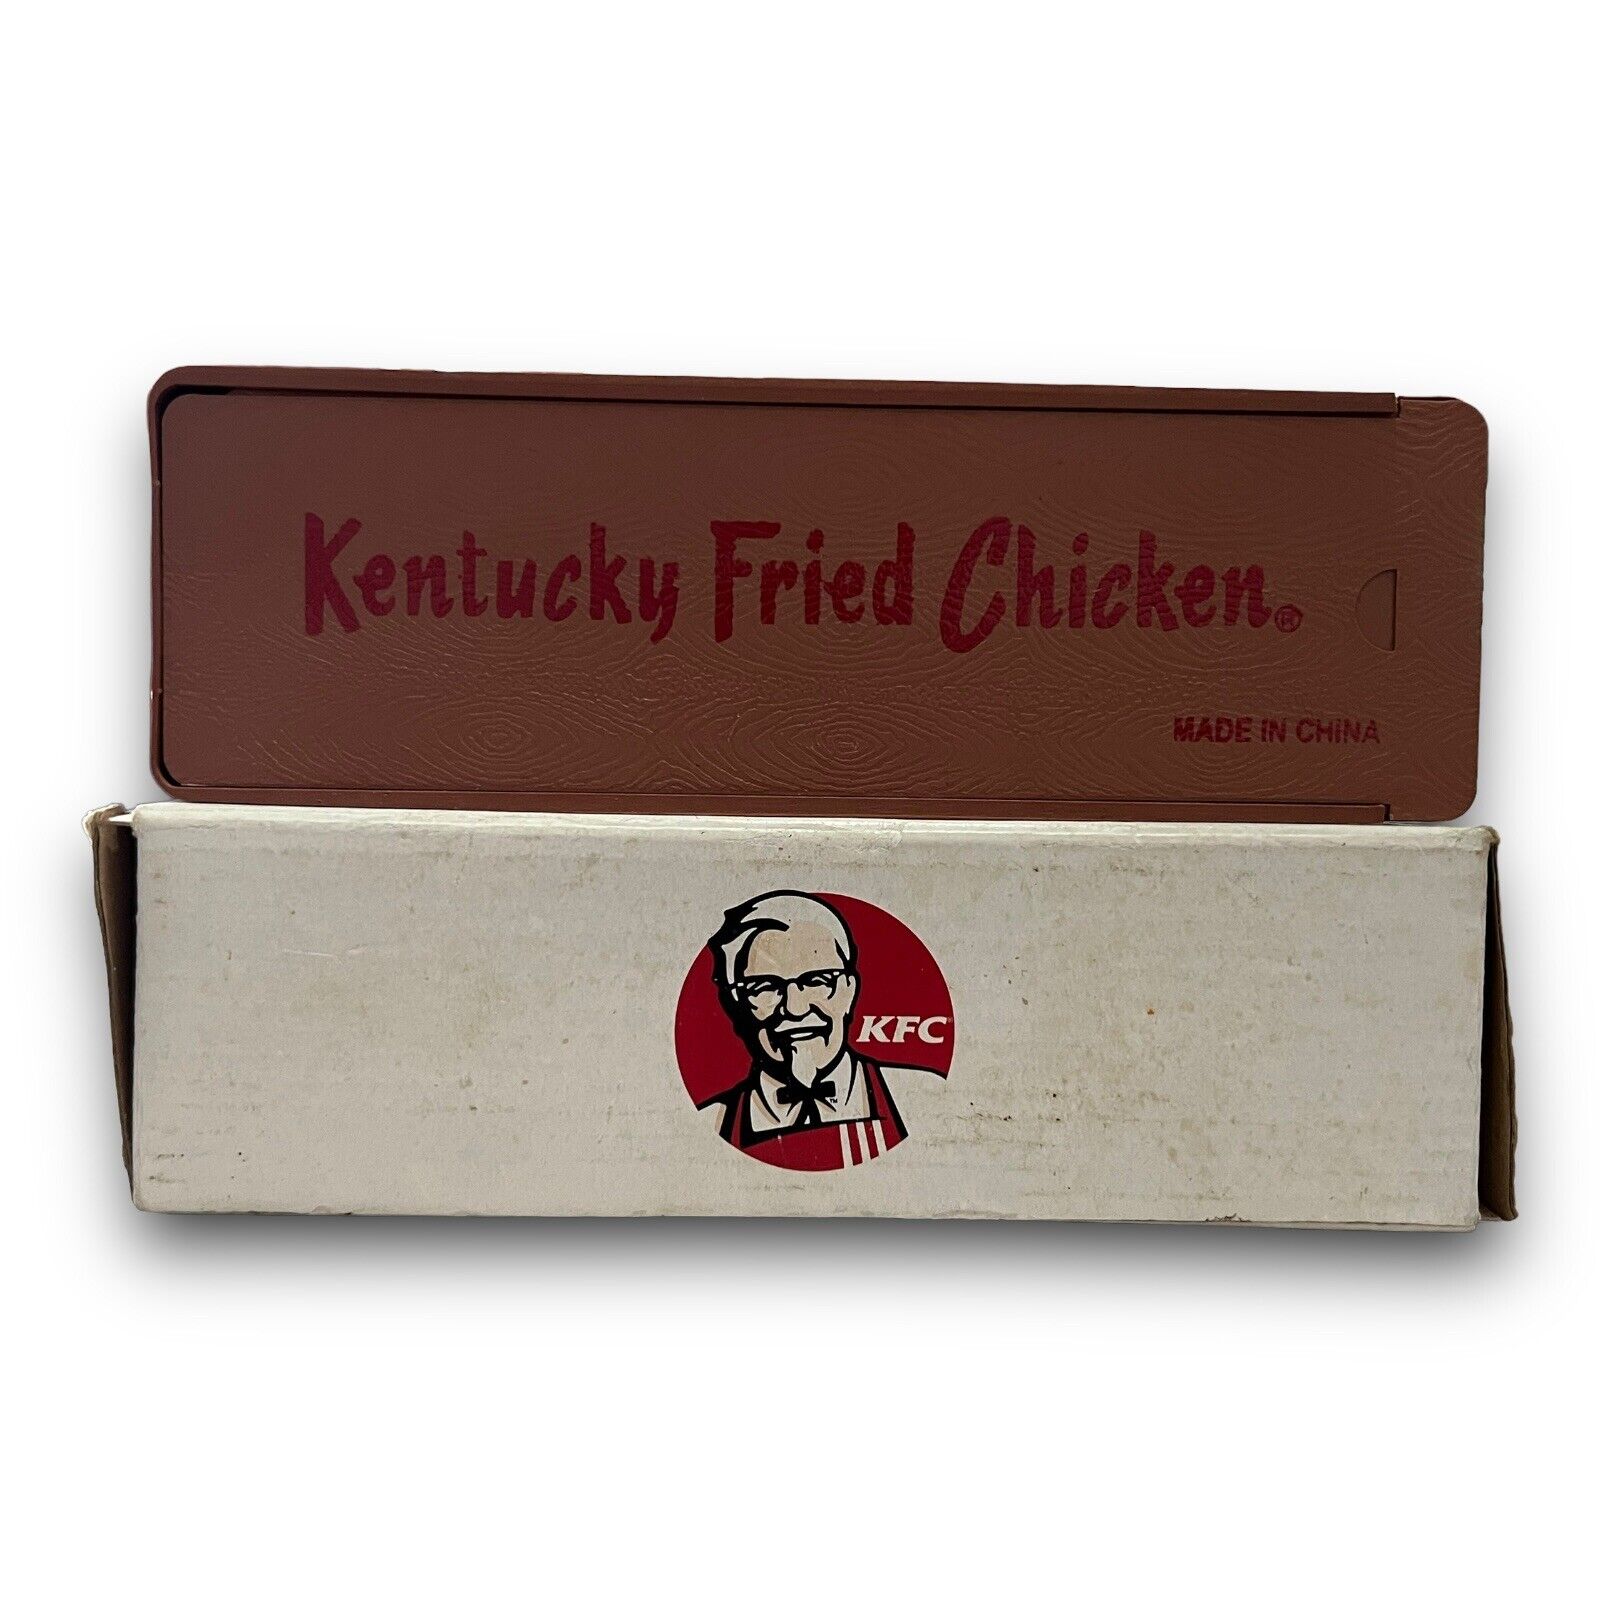 Kentucky Fried Chicken Dominoes Promo Set with Case Rare 28 Count Set